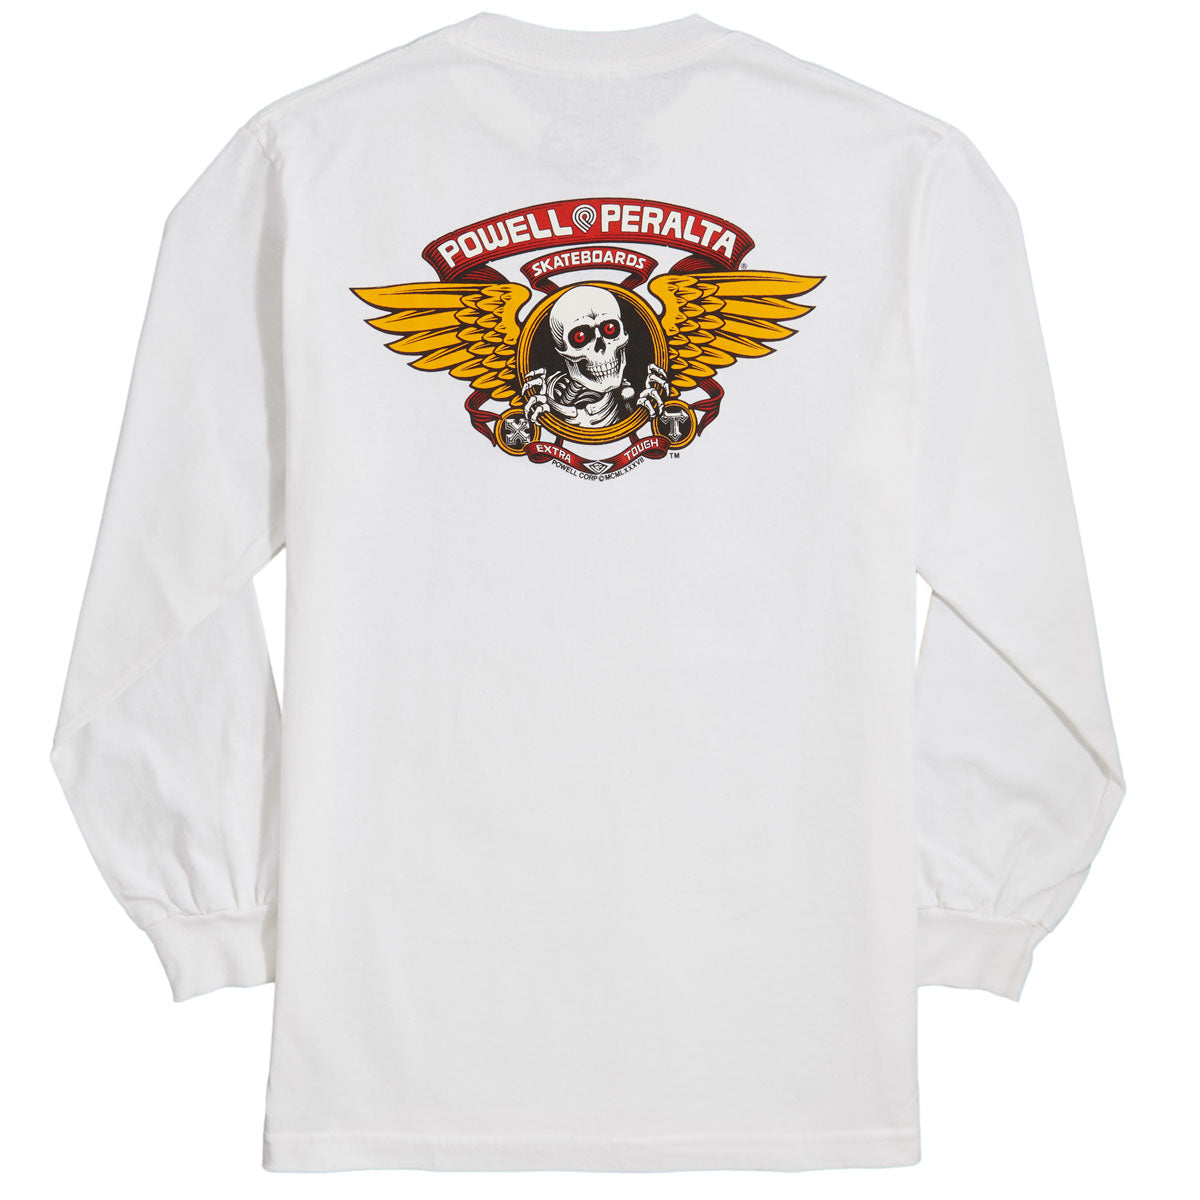 Powell-Peralta Winged Ripper Long Sleeve T-Shirt - White image 1